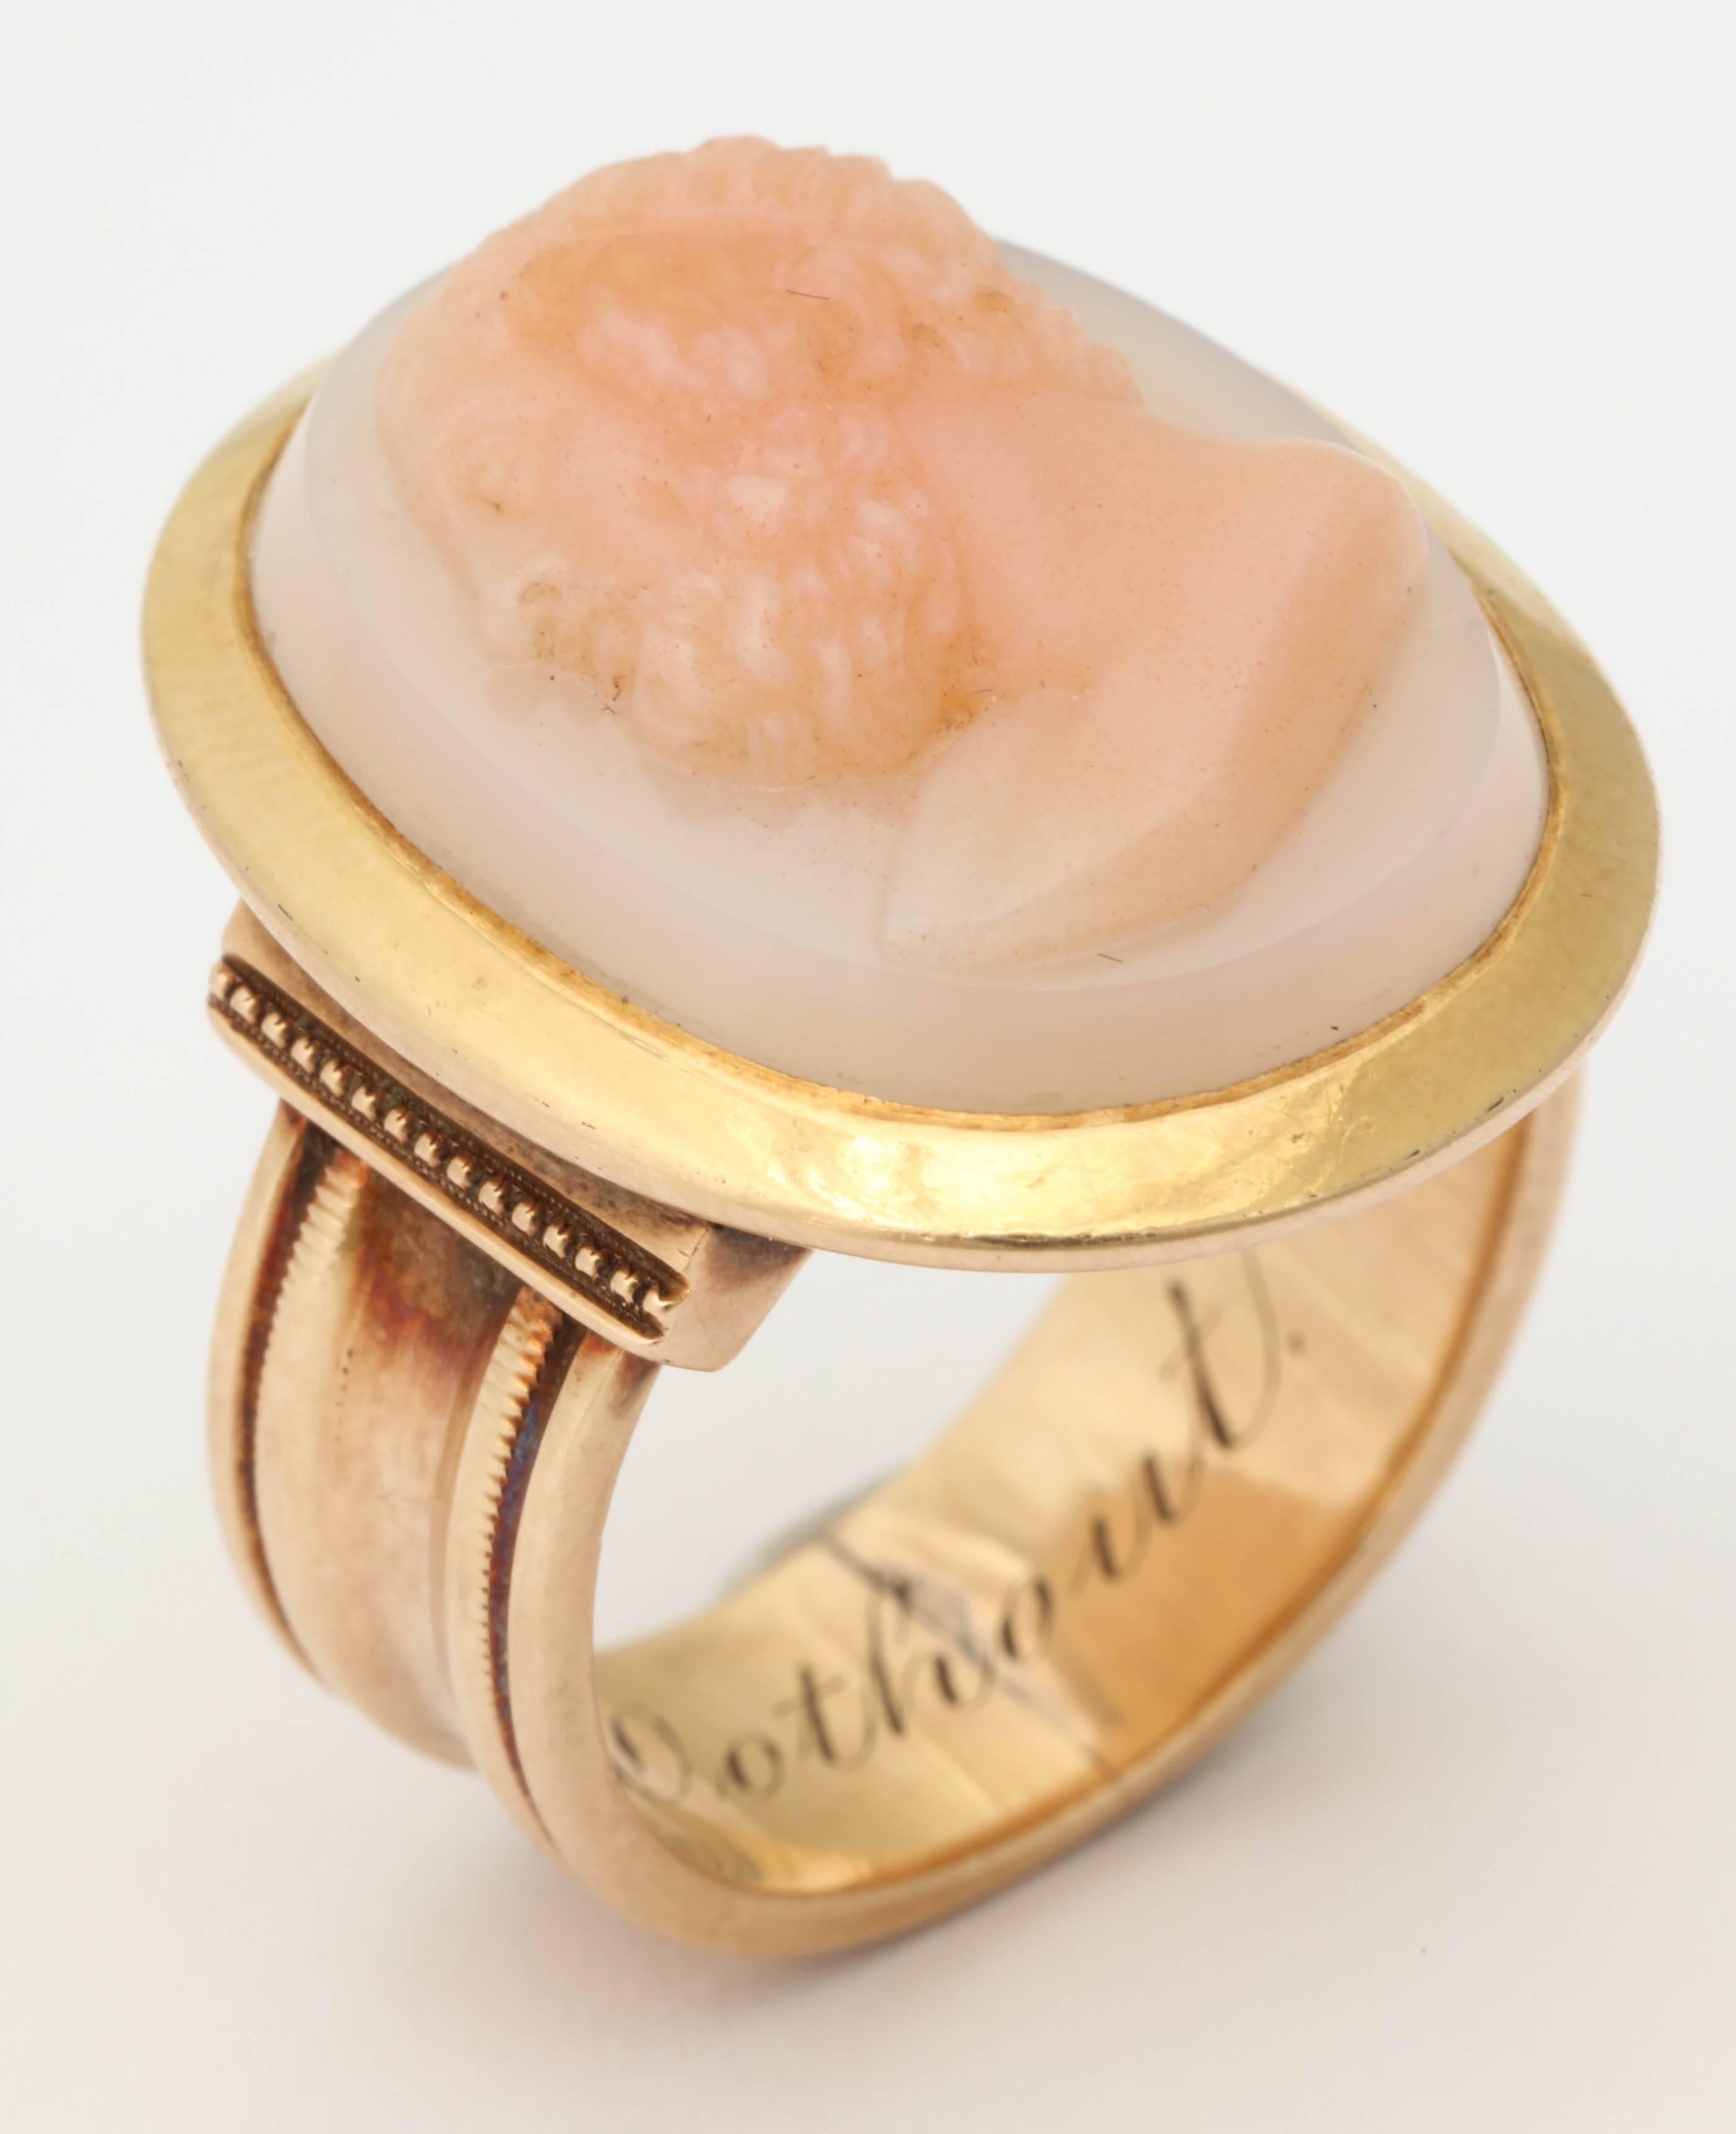 Direct from the family, this beautiful cameo ring was passed down from the early part of the 20th century and still has the family name engraved inside. The hard stone cameo, inspired by antiquity, is of an unknown man. 